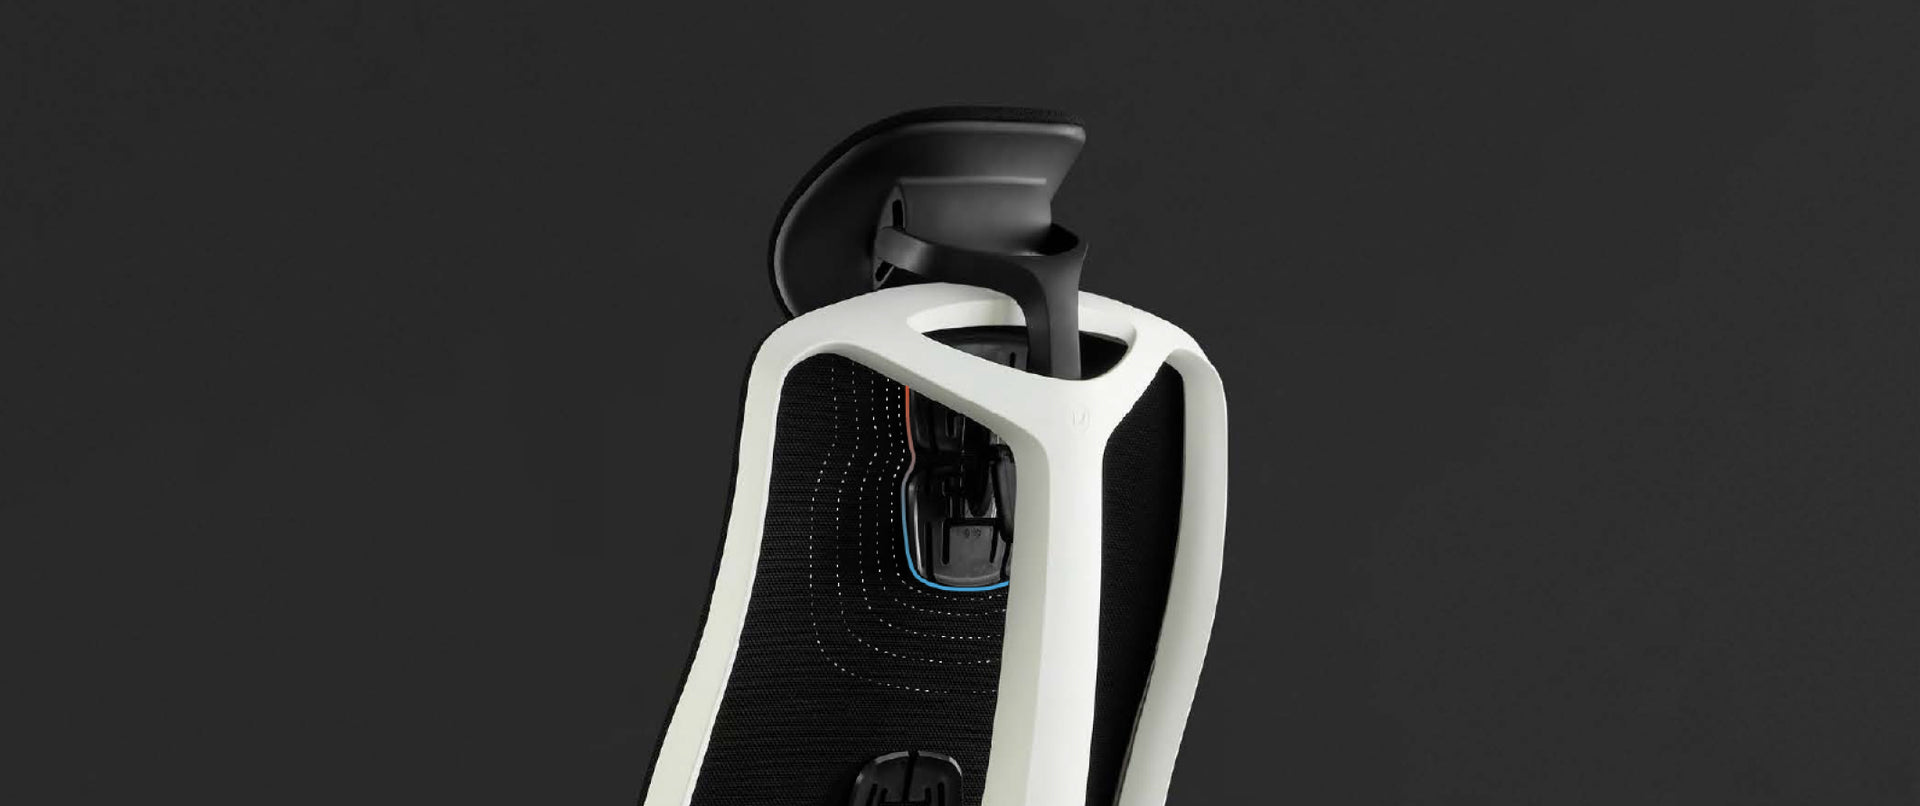 An animation highlighting new features on gaming chair, overlaid on a photo of the chair on a black background.